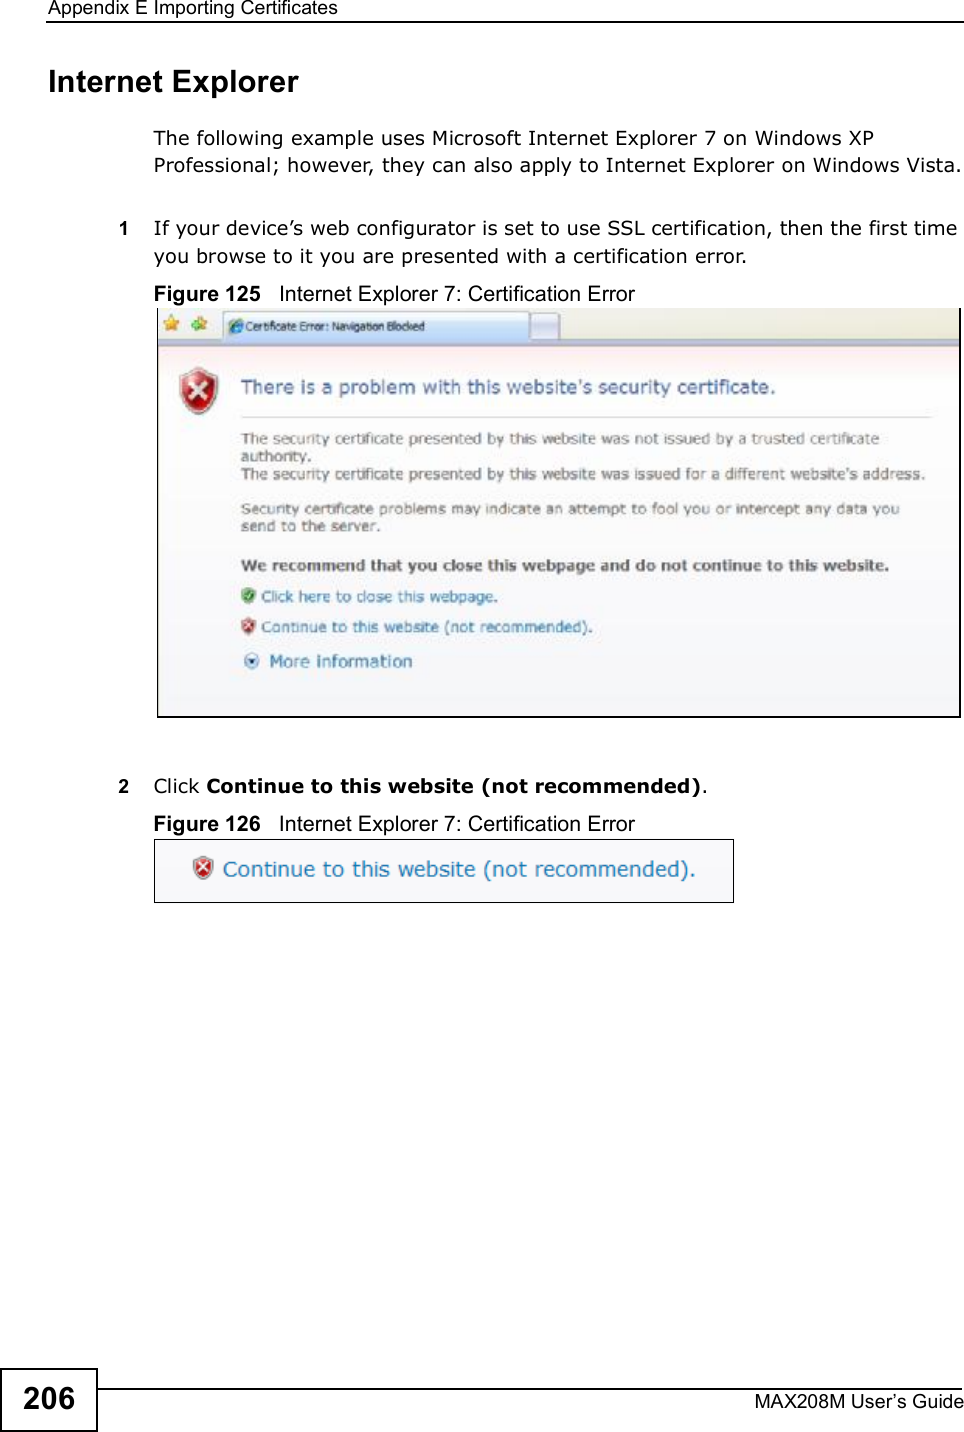 Appendix EImporting CertificatesMAX208M User s Guide206Internet ExplorerThe following example uses Microsoft Internet Explorer 7 on Windows XP Professional; however, they can also apply to Internet Explorer on Windows Vista.1If your device s web configurator is set to use SSL certification, then the first time you browse to it you are presented with a certification error.Figure 125   Internet Explorer 7: Certification Error2Click Continue to this website (not recommended).Figure 126   Internet Explorer 7: Certification Error